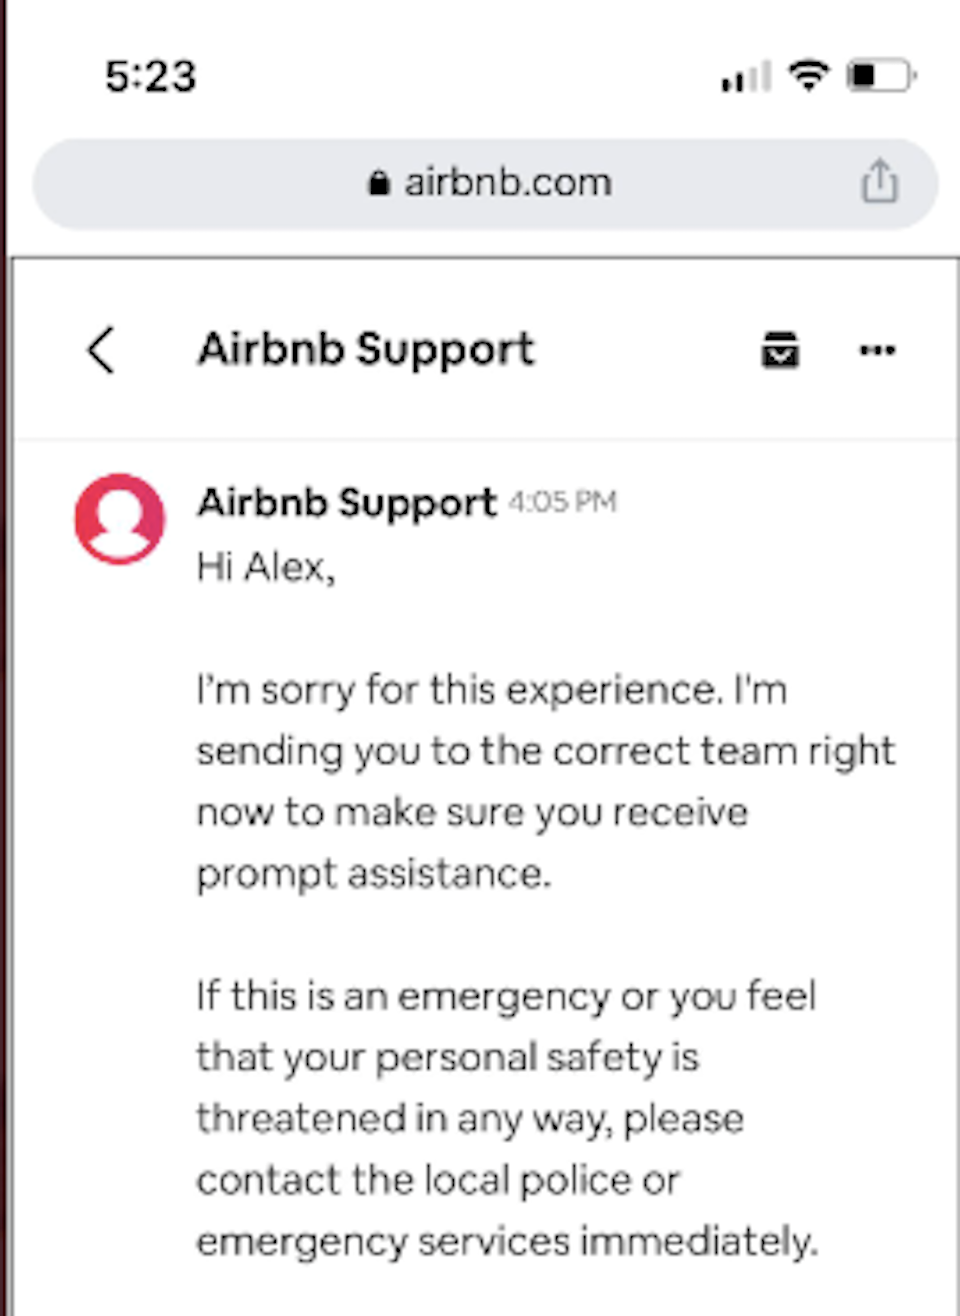 airbnb-support-message.jpg